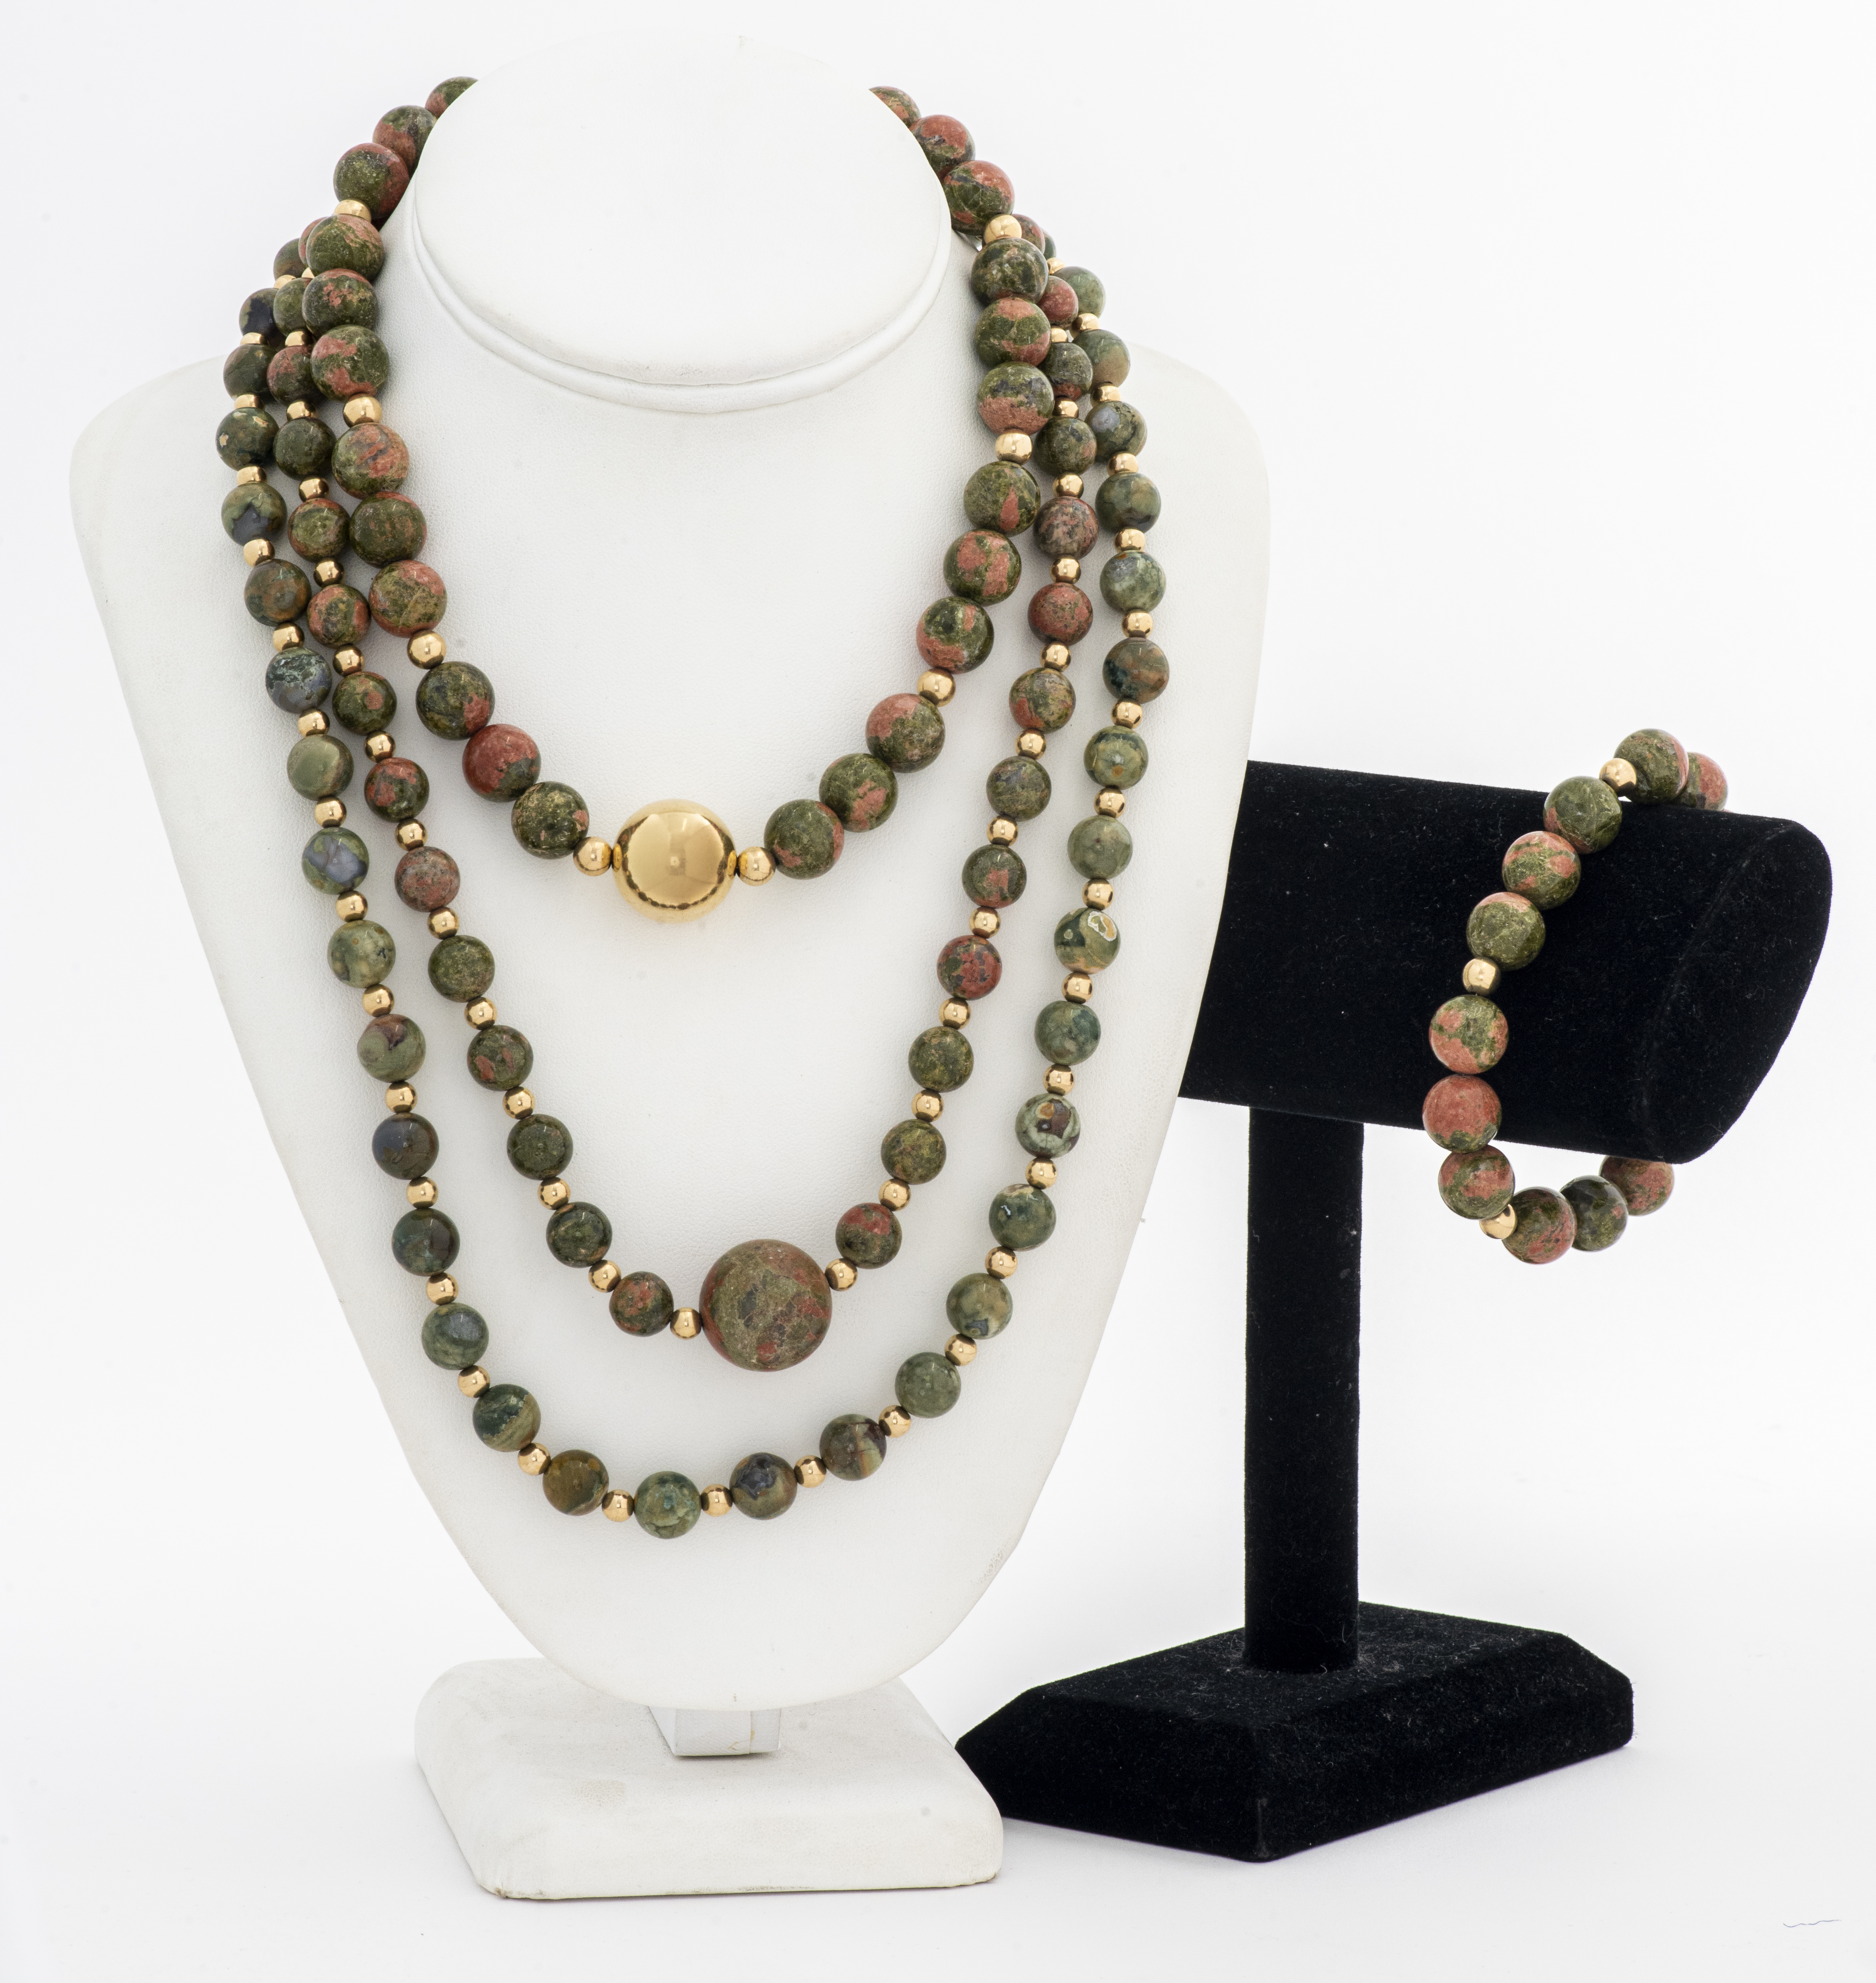 GROUP OF UNAKITE GOLD-TONE NECKLACE